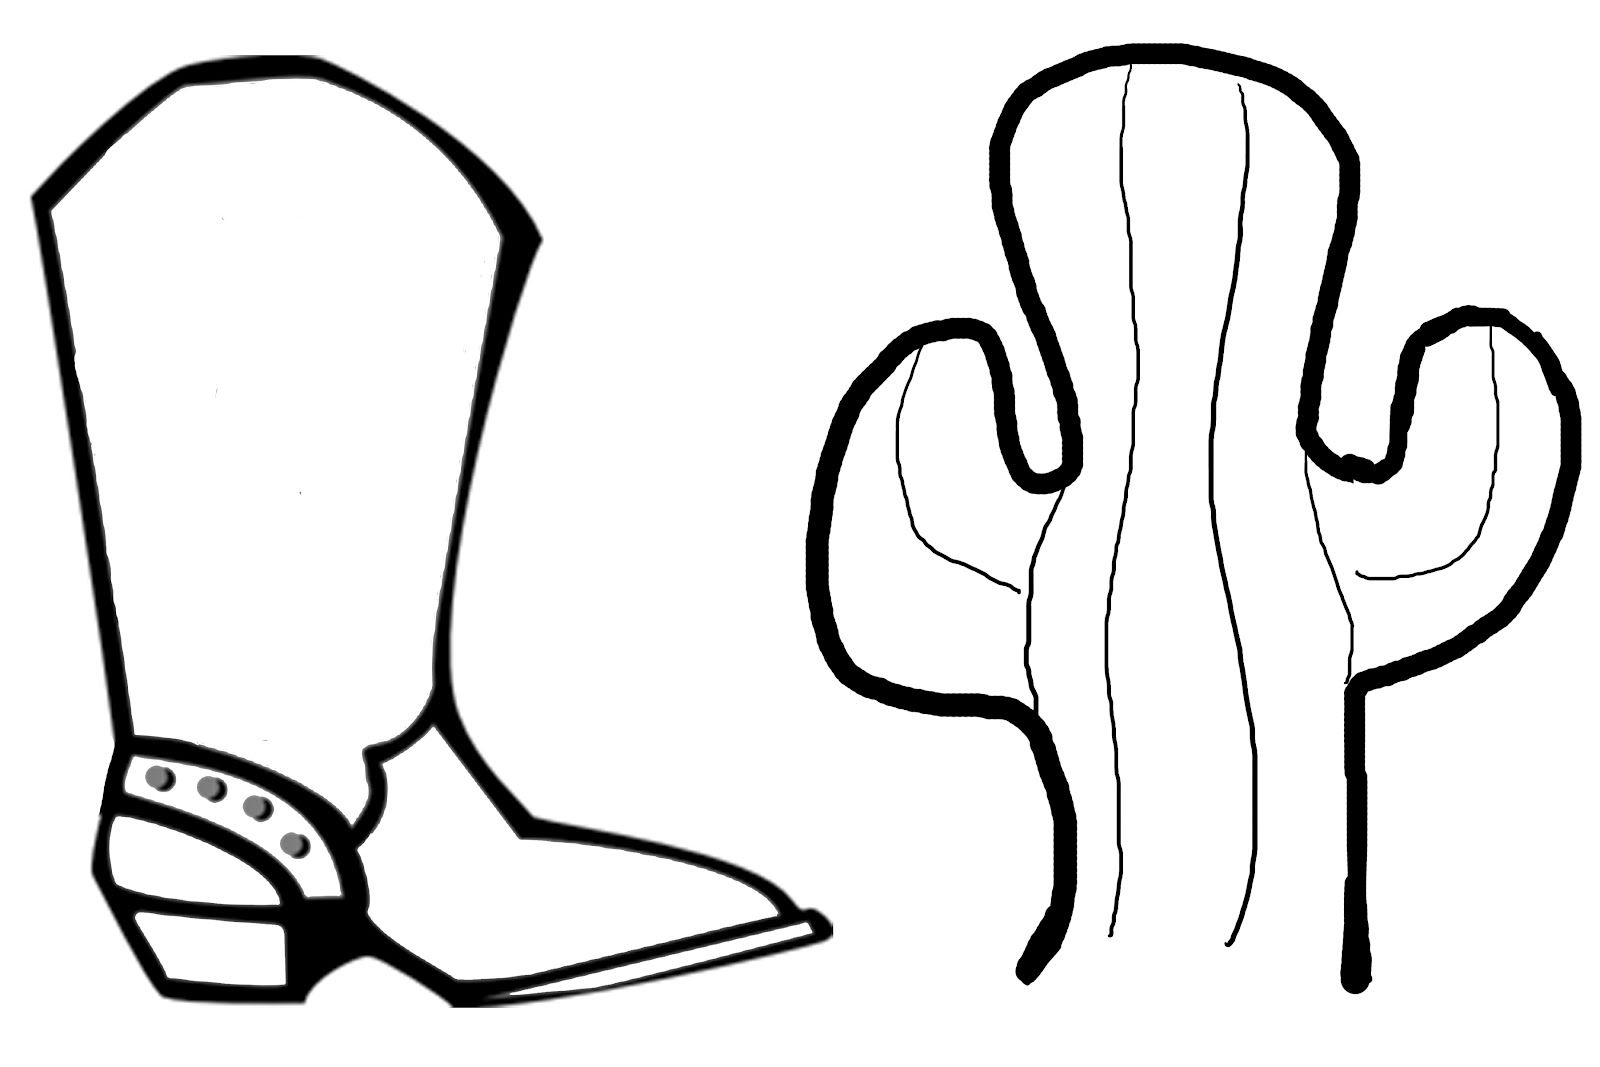 Cowboy Hat Coloring Pages Cowboy Boots And Hat Drawing Free Download Best Cowboy Boots And